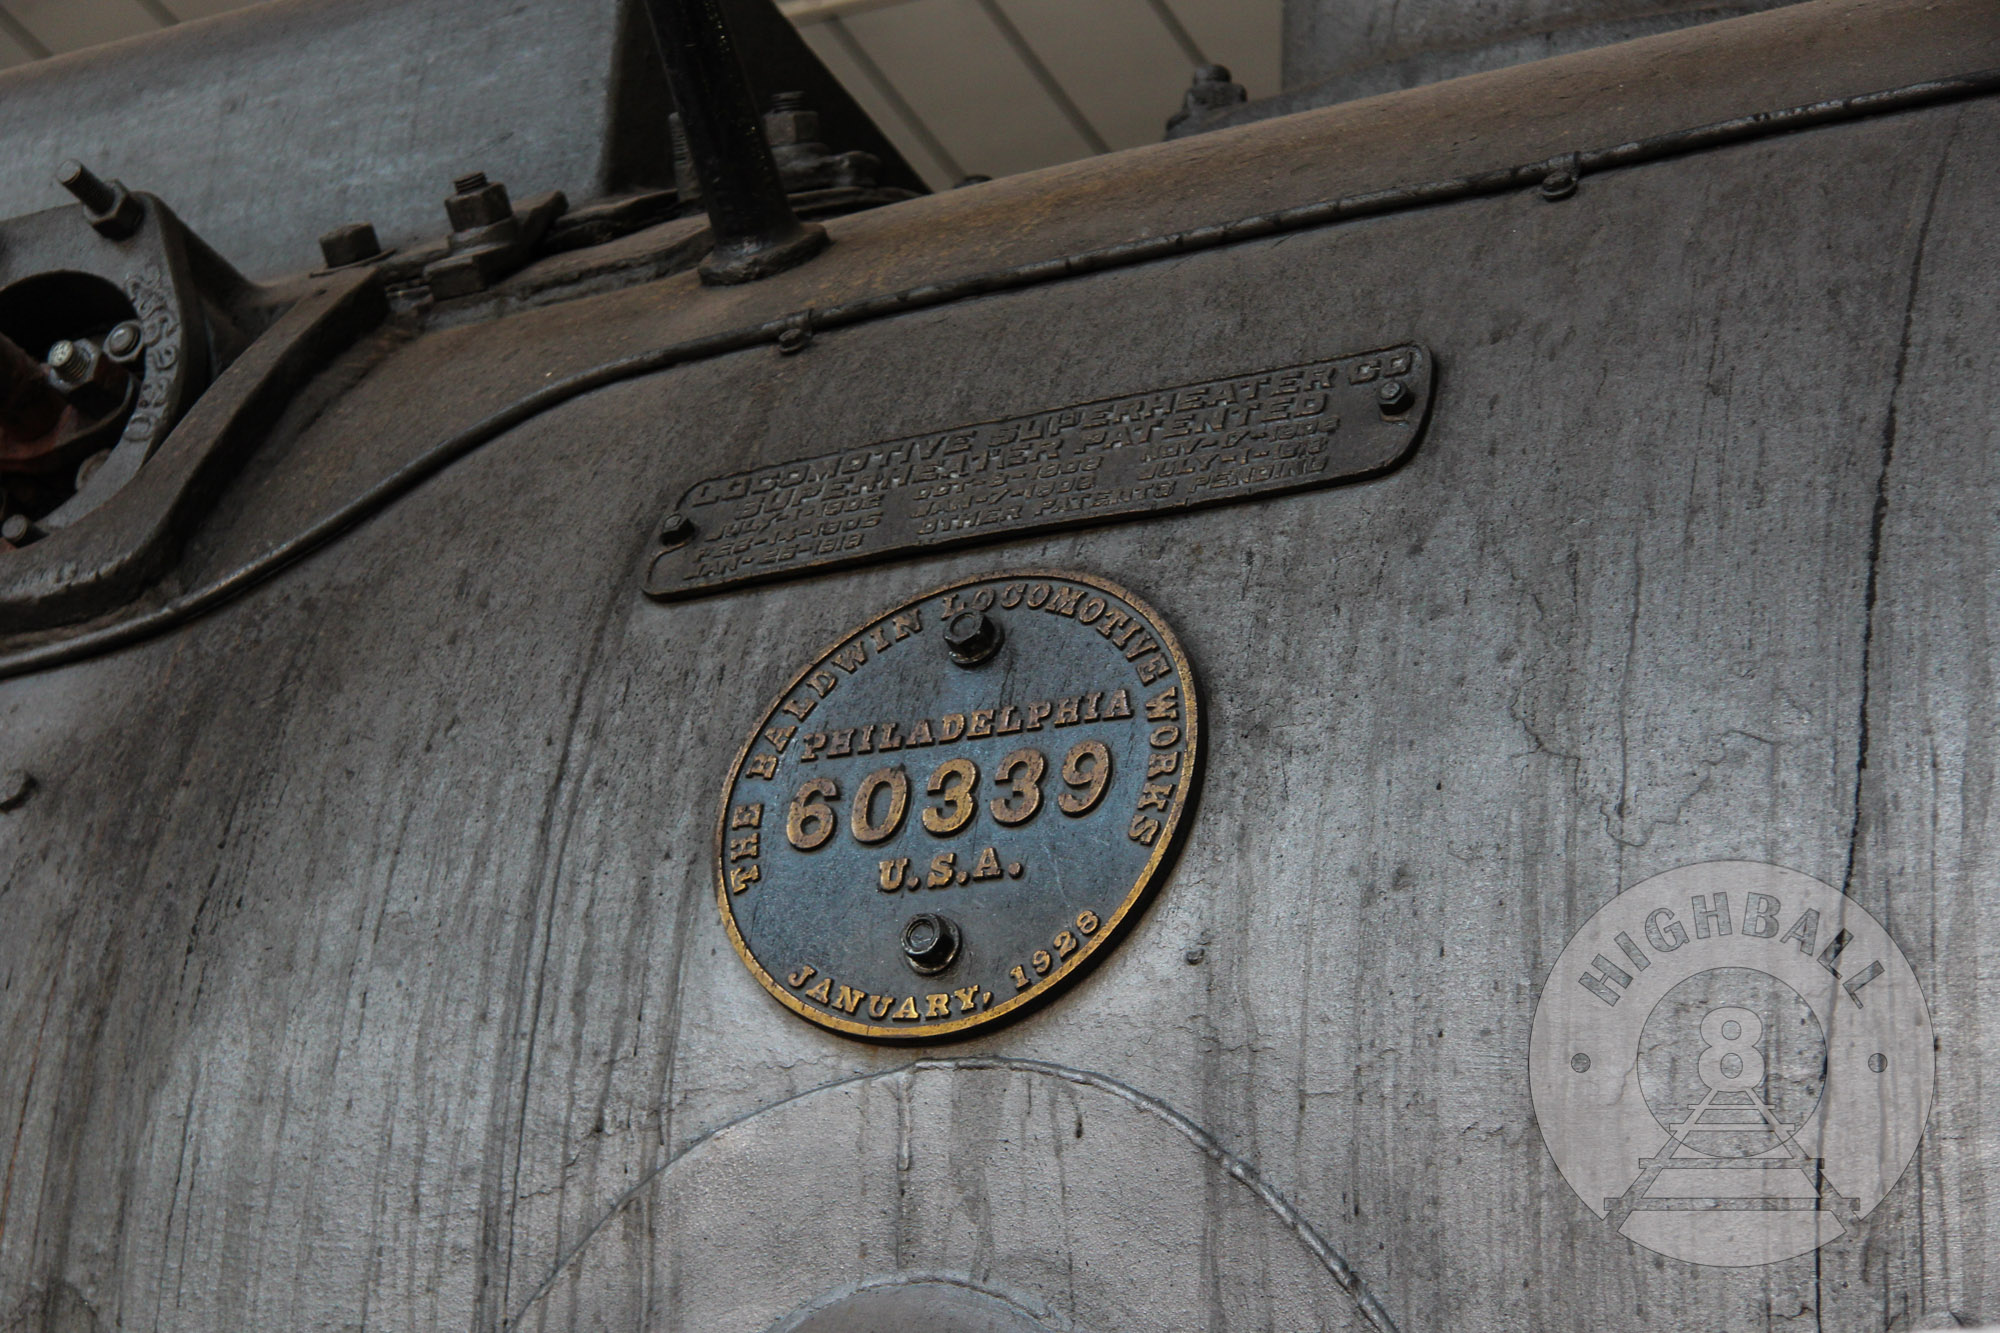 Detail of the tank of an old Baldwin Locomotive steam engine in the workshops of the Reading Blue Mountain & Northern Railroad, Port Clinton, Pennsylvania, USA, 2016.